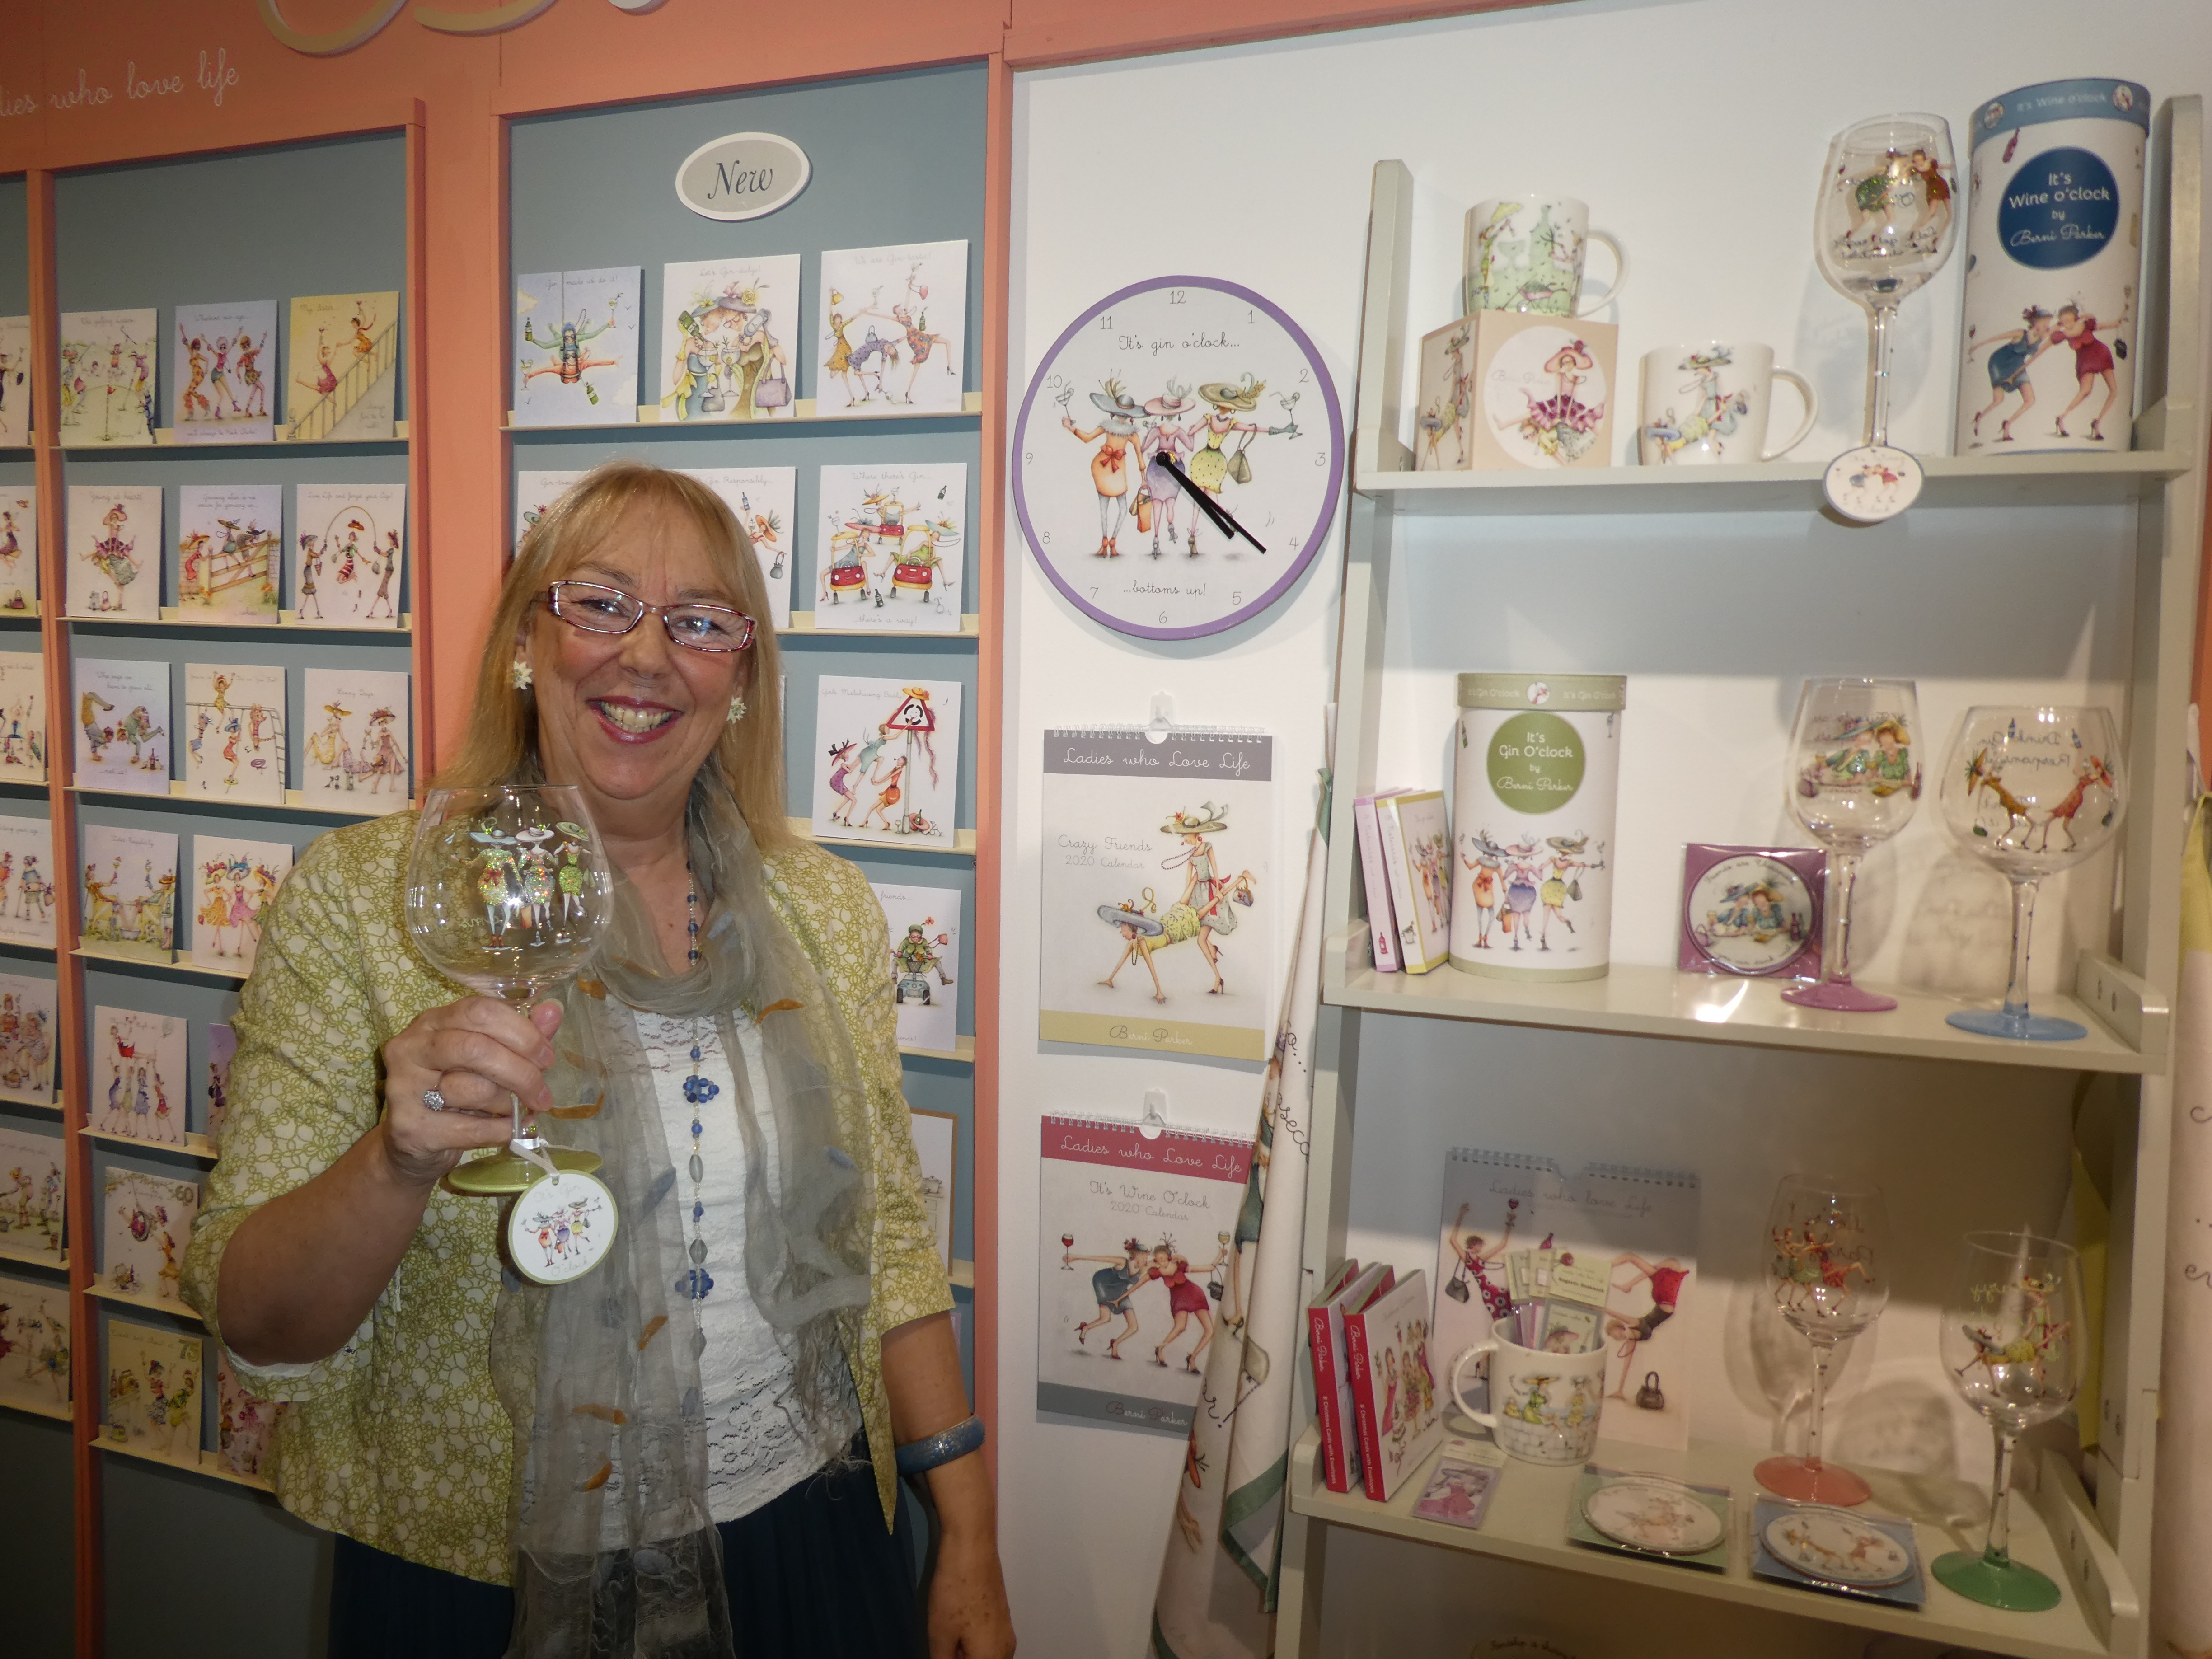 Above: It was a cheers from Berni Parker who christened the company’s diversification into extending its portfolio into producing glassware, calendars, clocks and more gifts under its own steam. 